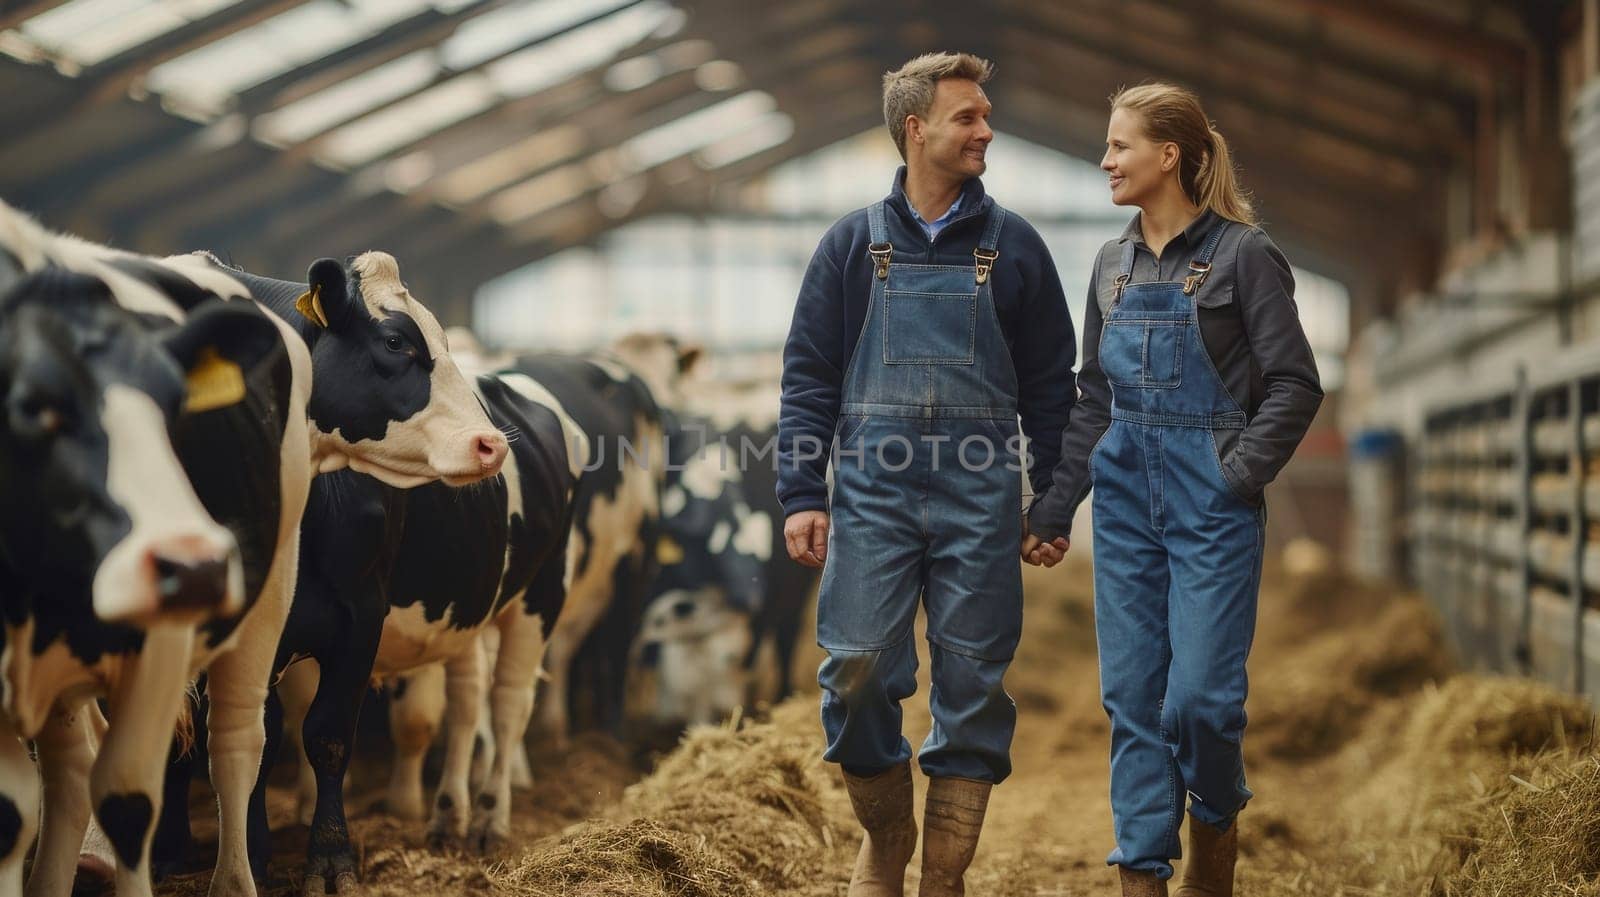 A man and woman are walking through a barn with cows. Scene is peaceful and romantic